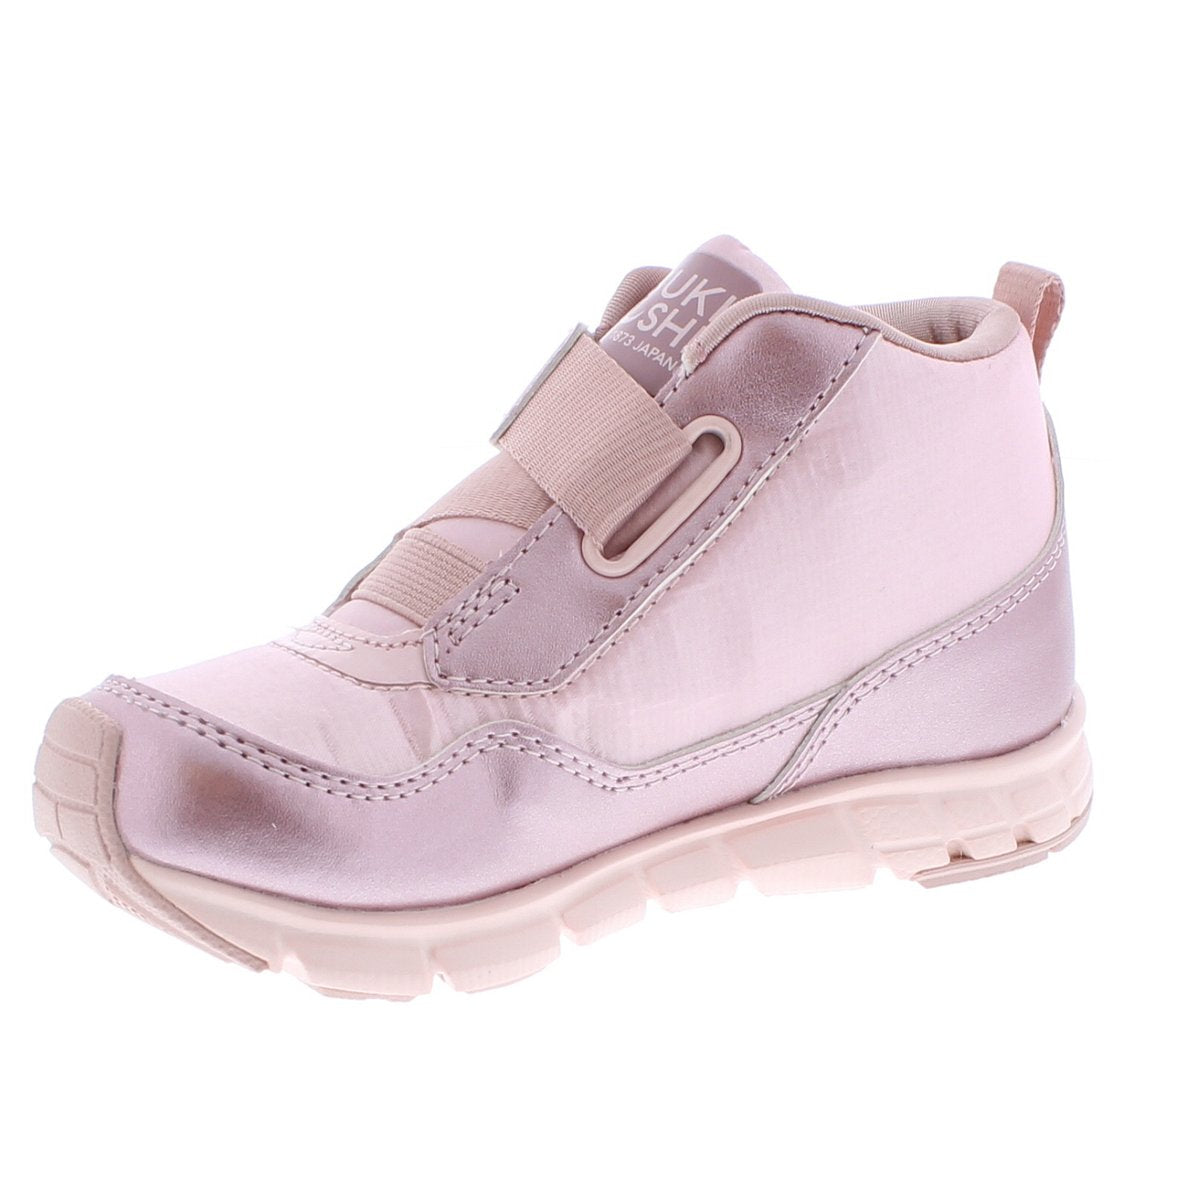 Child Tsukihoshi Tokyo Sneaker in Pink/Rose from the front view